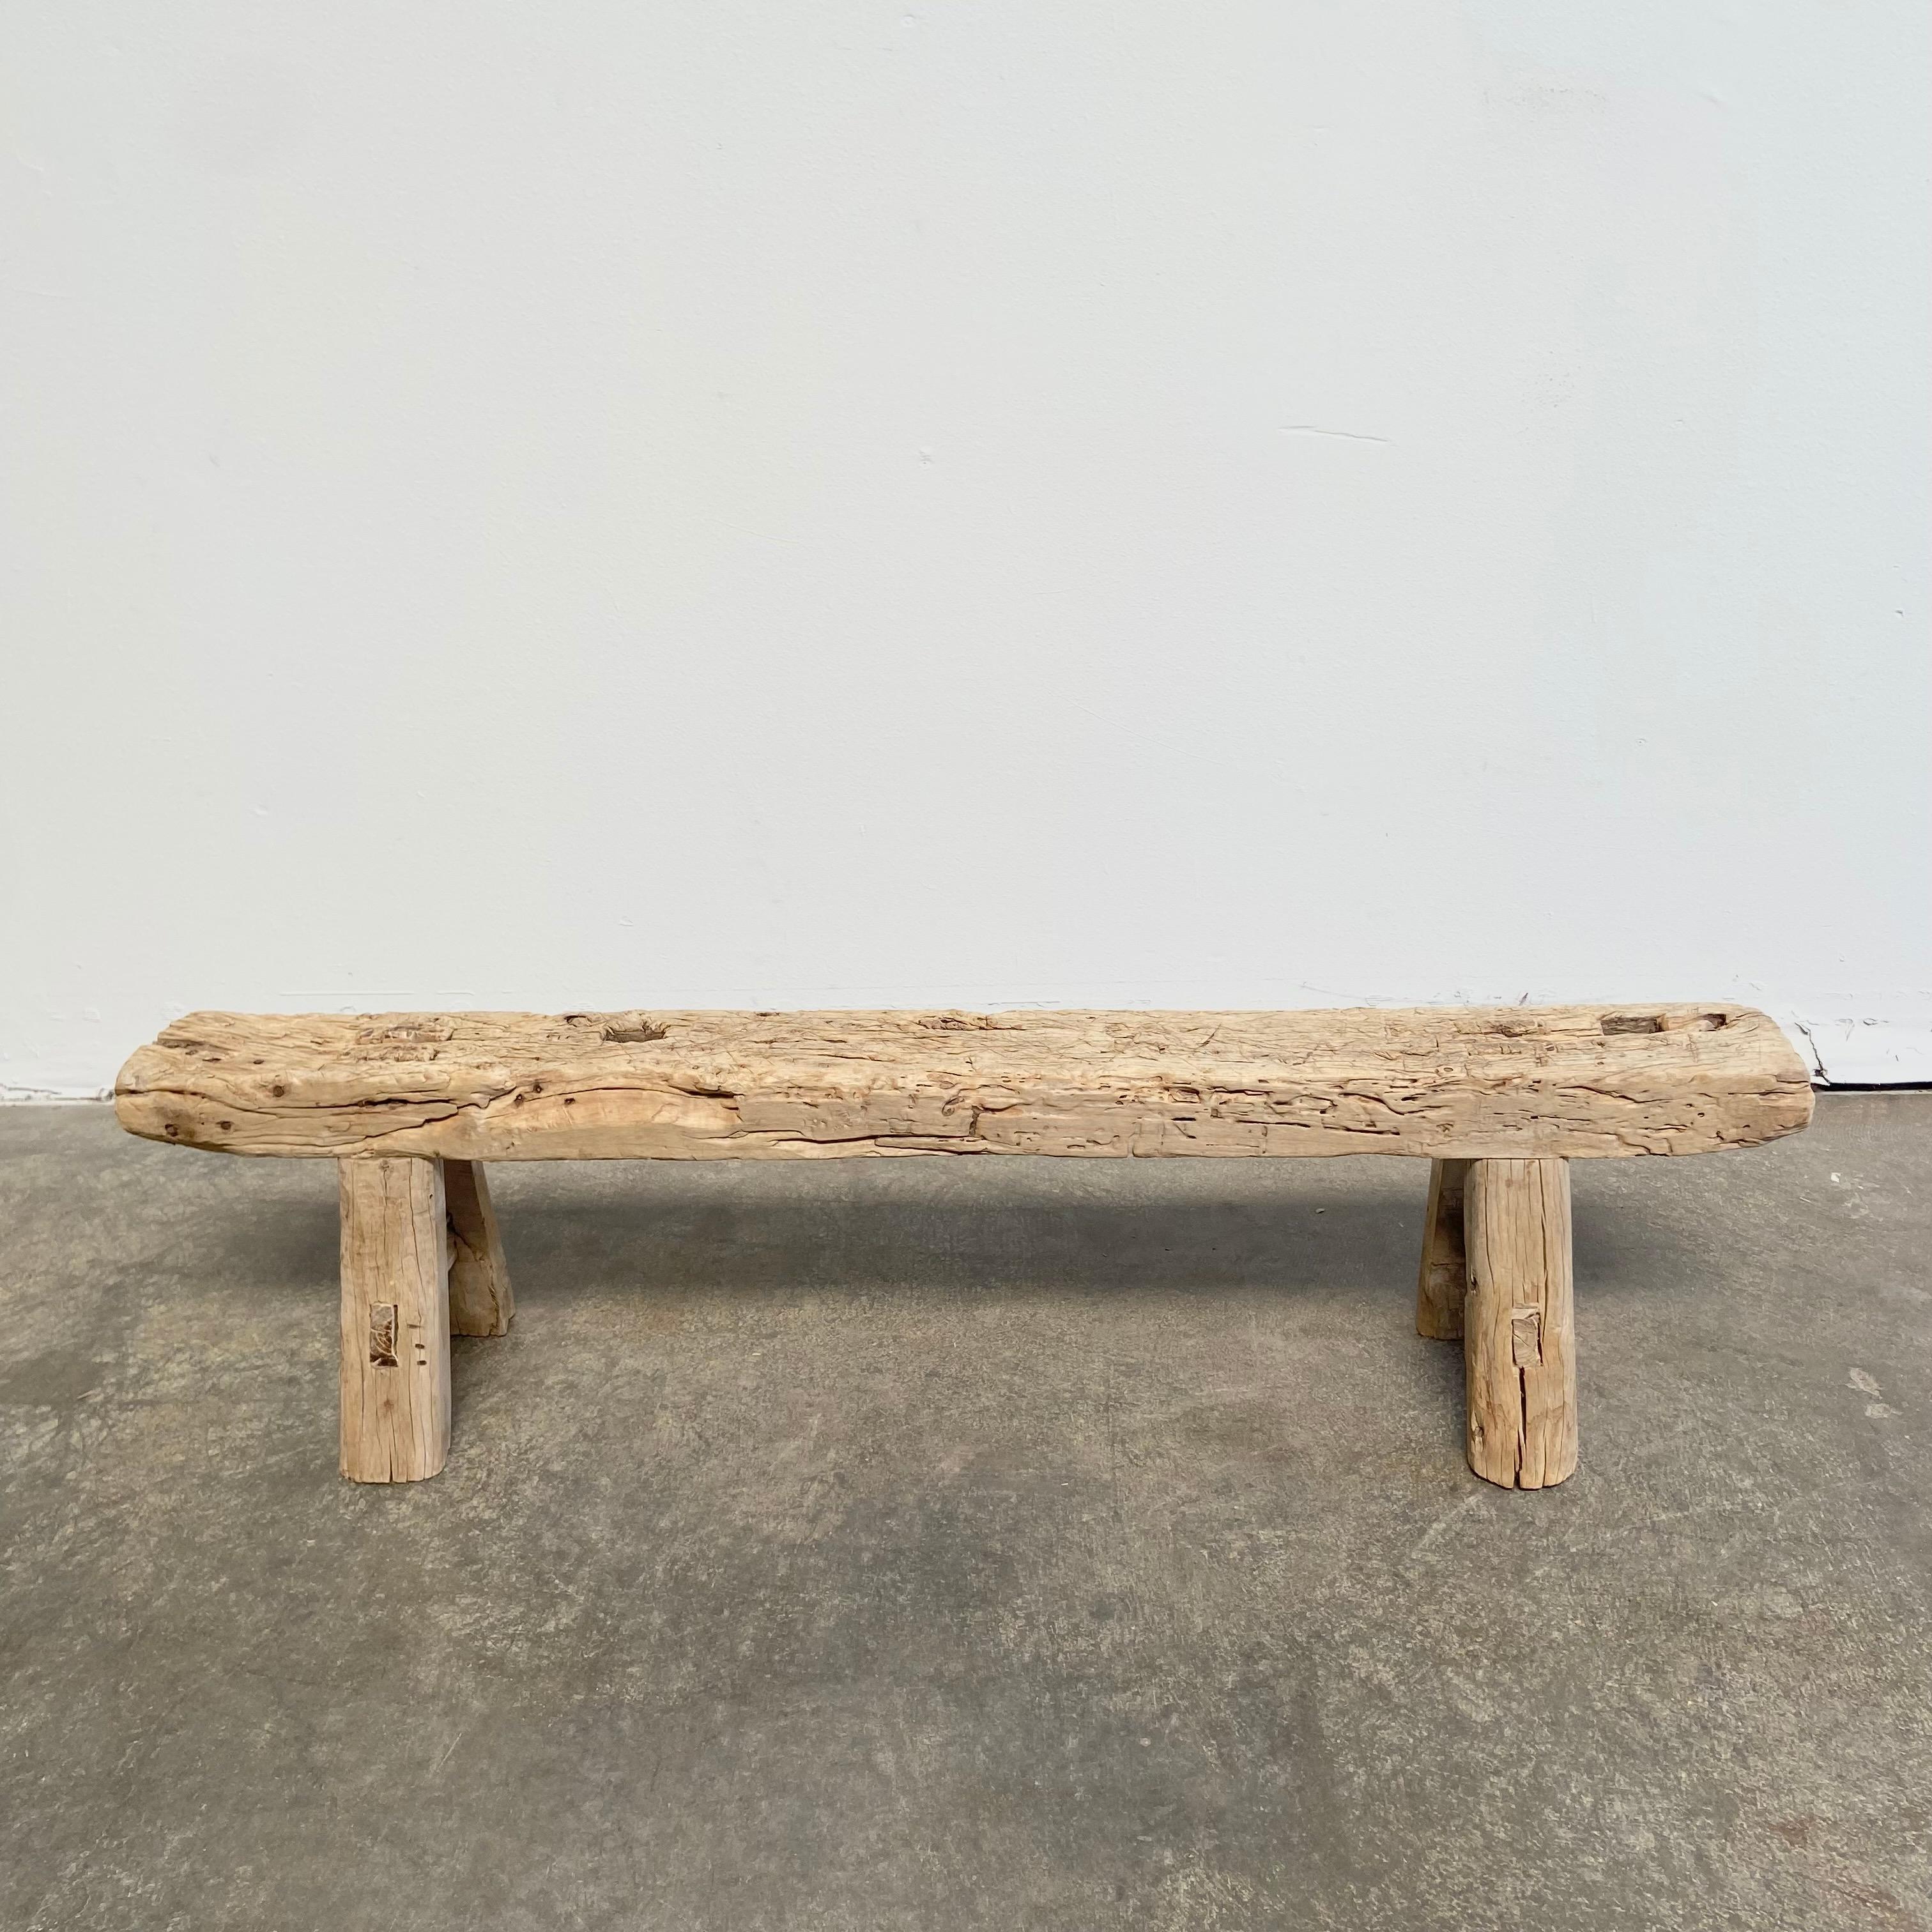 Vintage antique elm wood bench
These are the real vintage antique elm wood benches! Beautiful antique patina, with weathering and age, these are solid and sturdy ready for daily use, use as as a table behind a sofa, stool, coffee table, they are